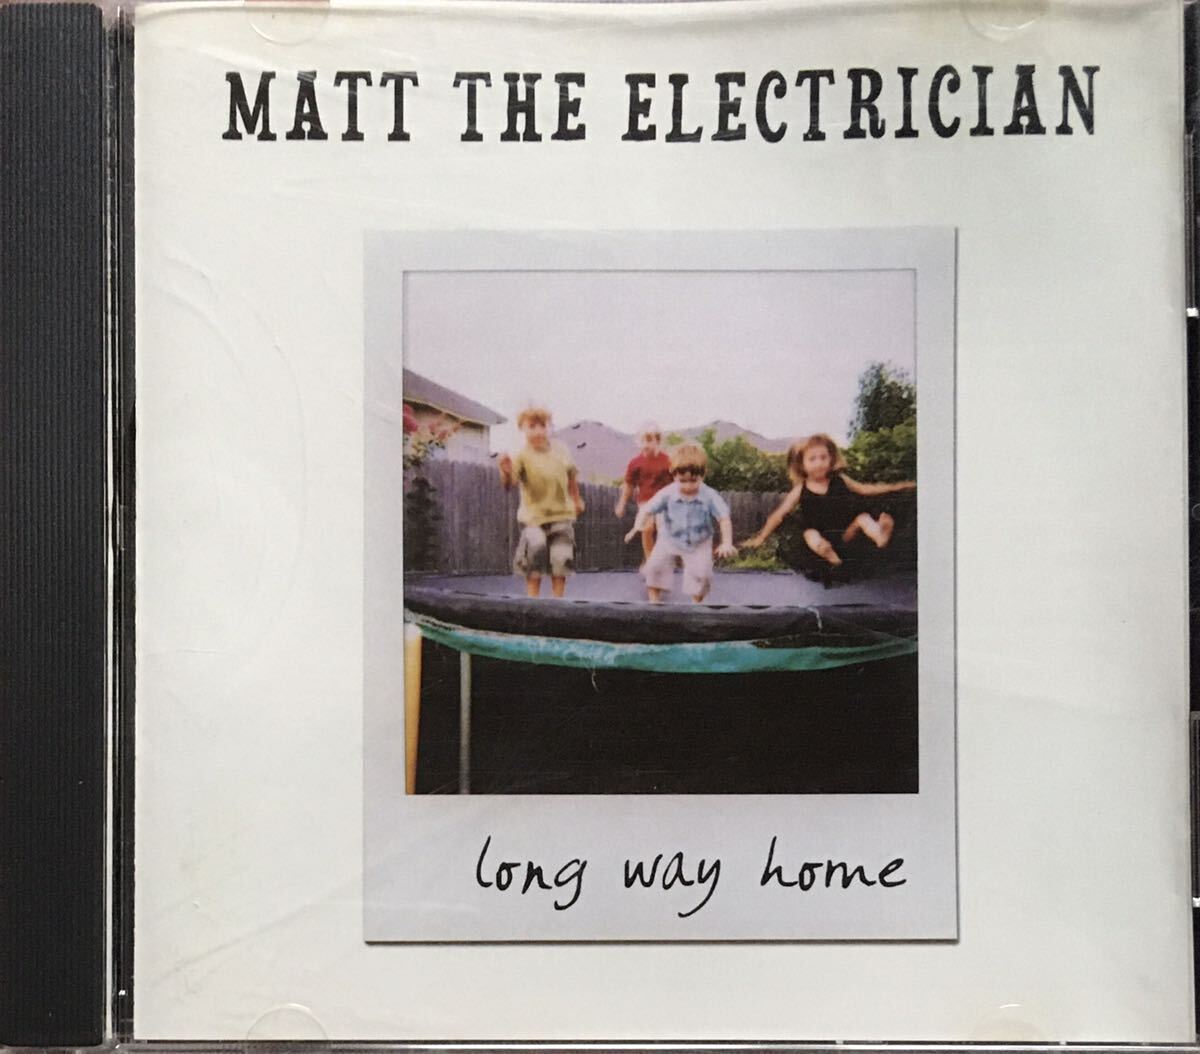 Matt The Electrician [Long Way Home]テキサス / シンガーソングライター / フォークロック / カントリーロック / The Recentmentsの画像1